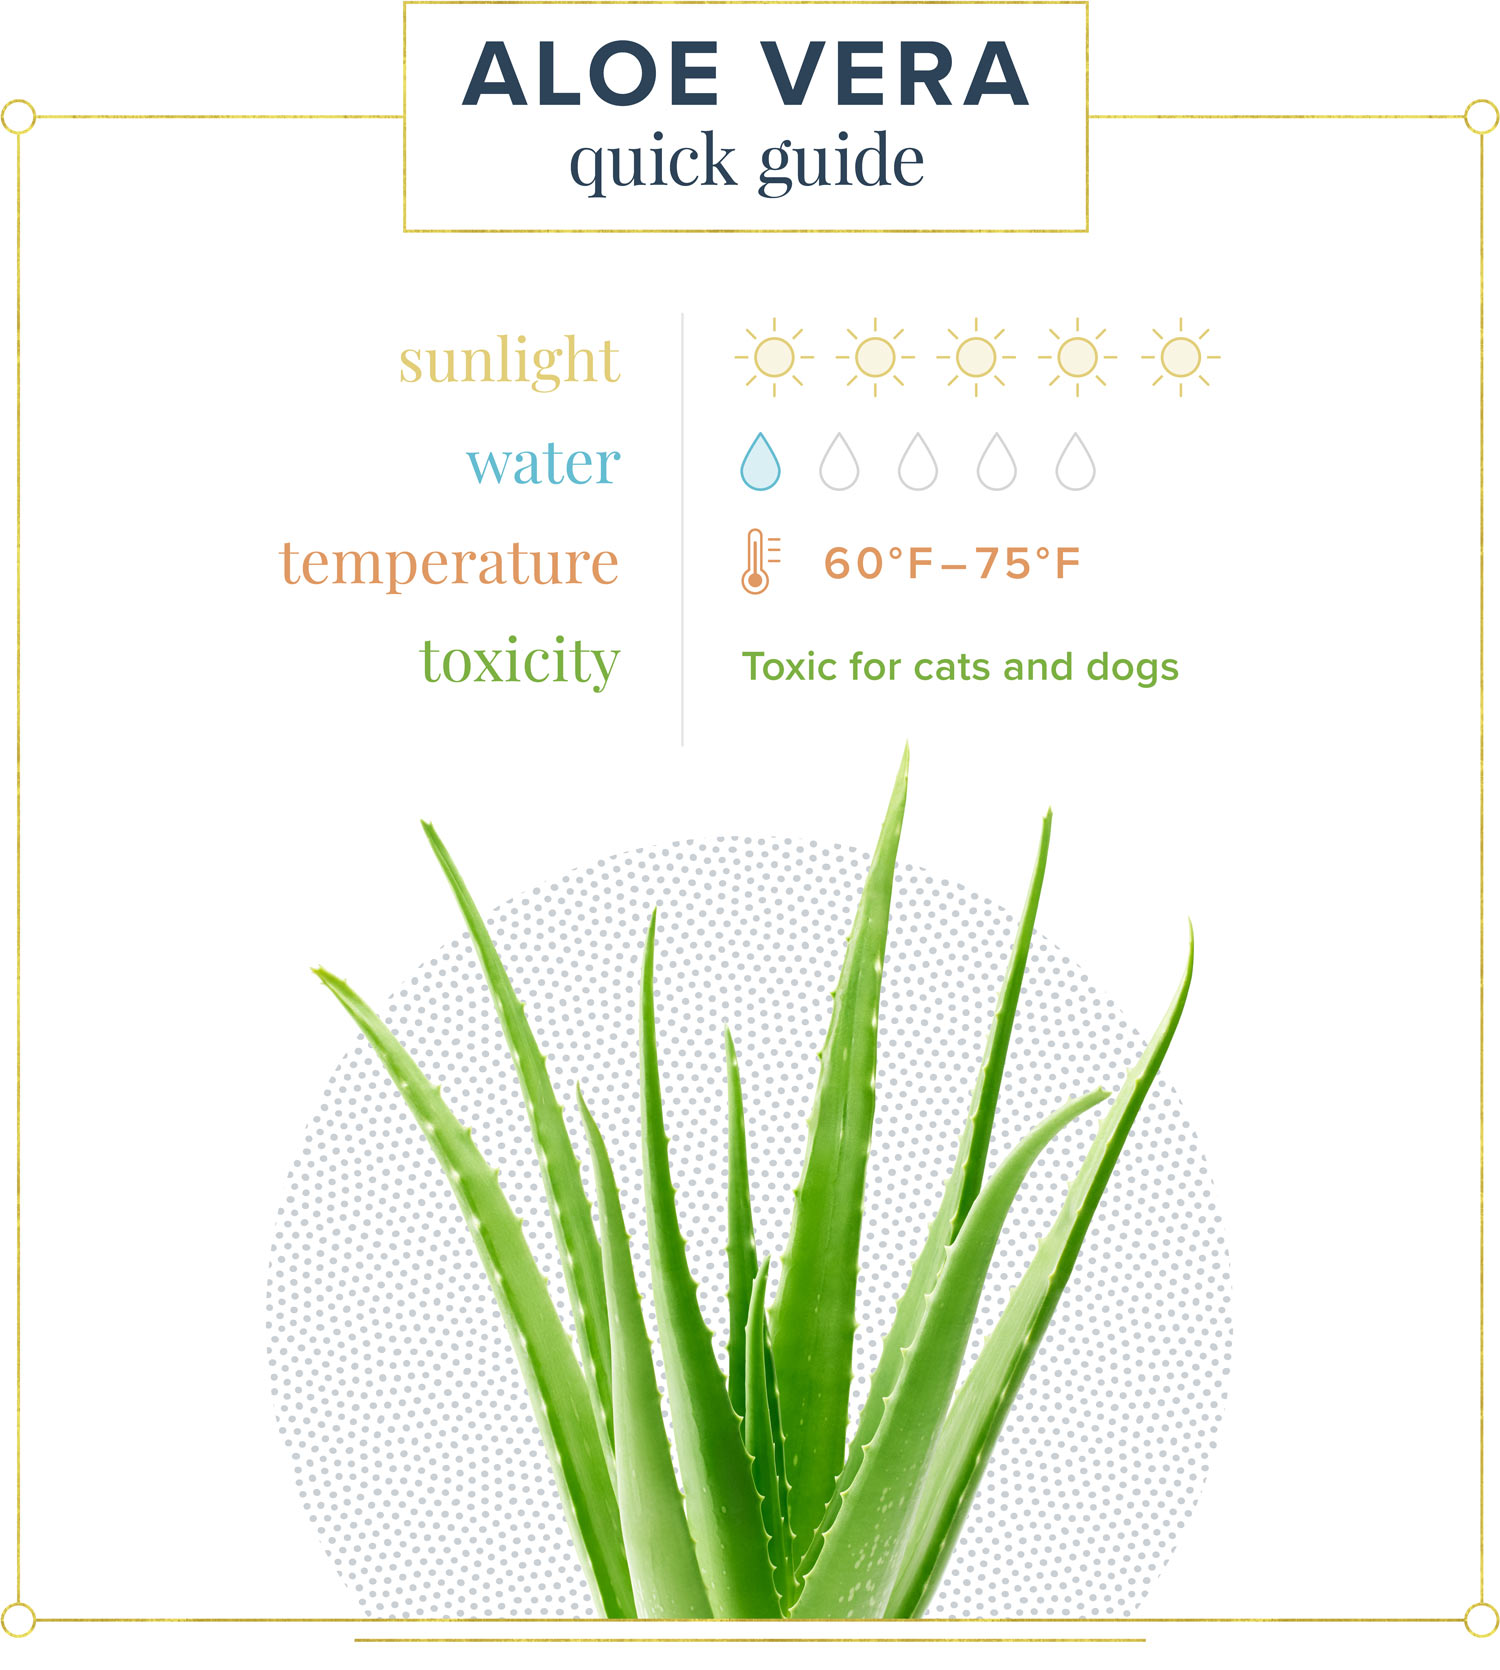 aloe vera quick guide: five suns, one water, 65-75 degrees Fahrenheit, toxic for cats and dogs
